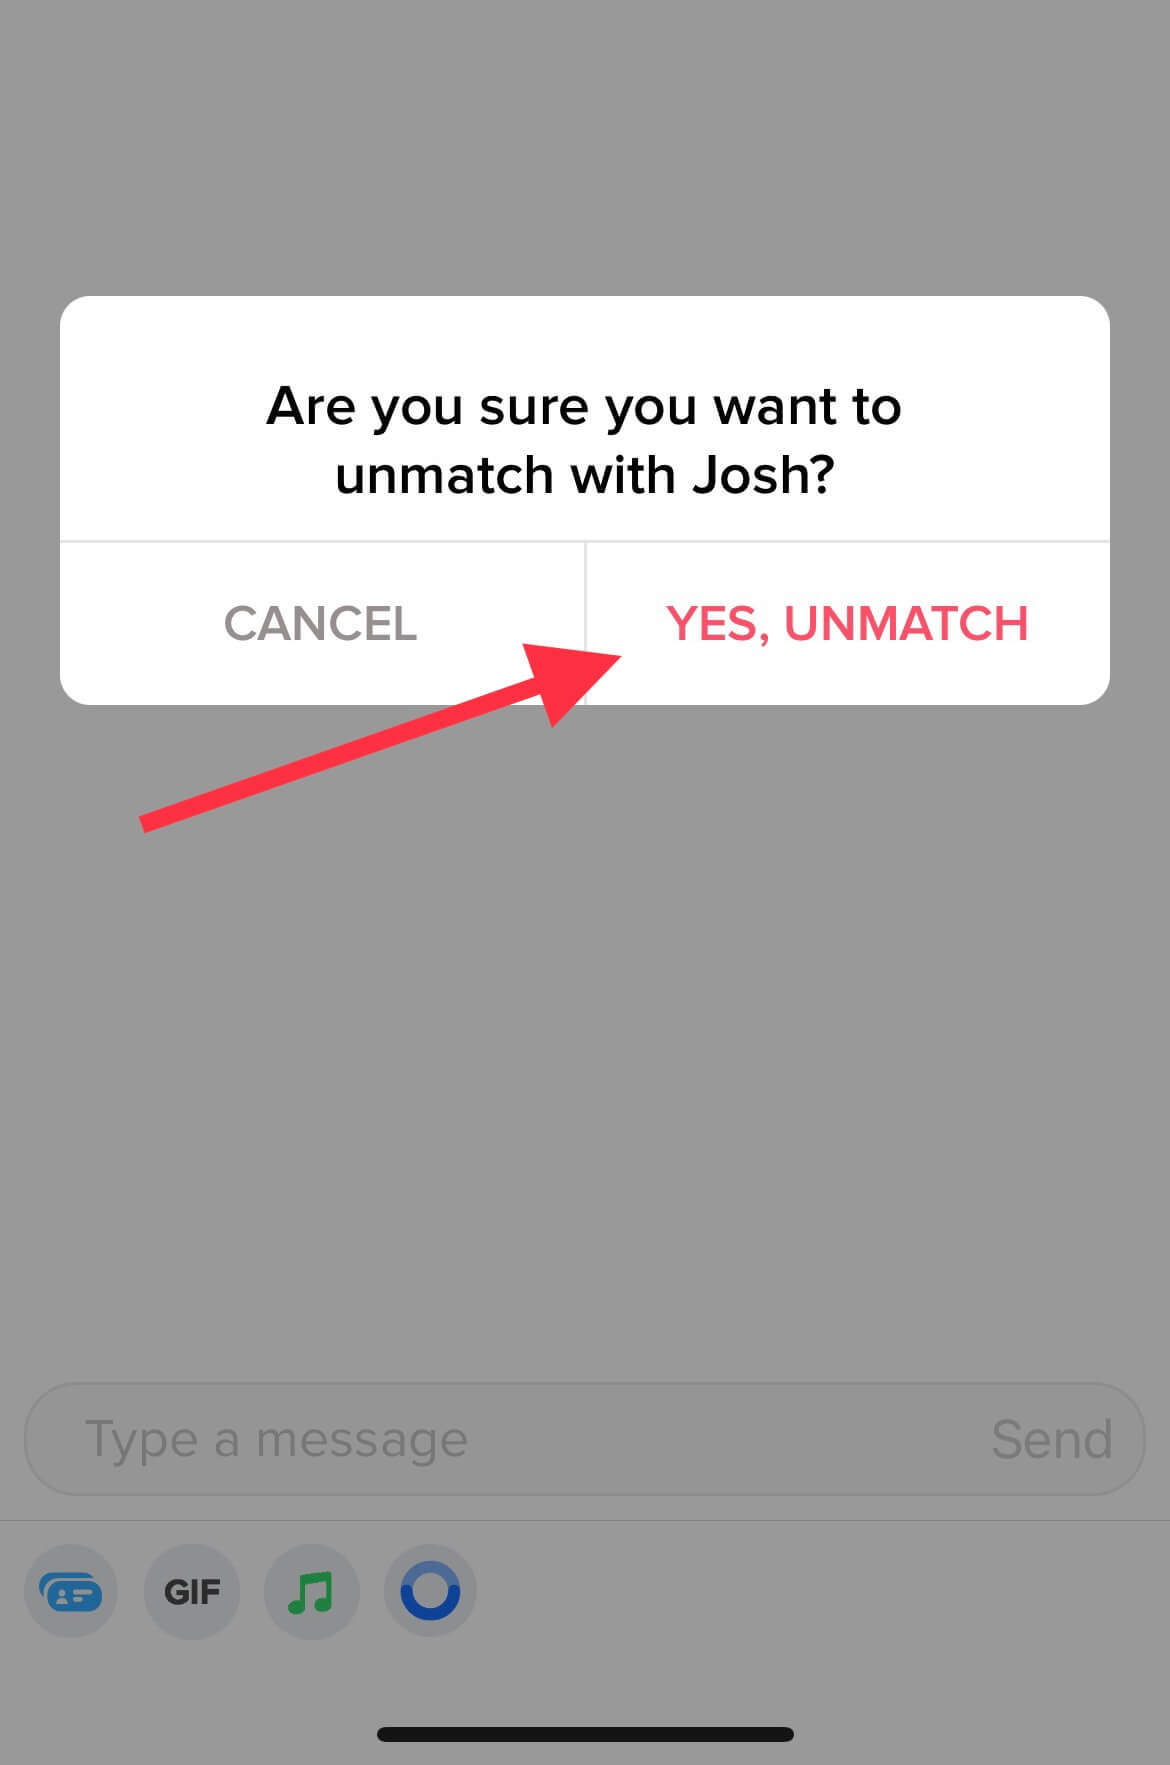 interface of unmatch message on delete tinder